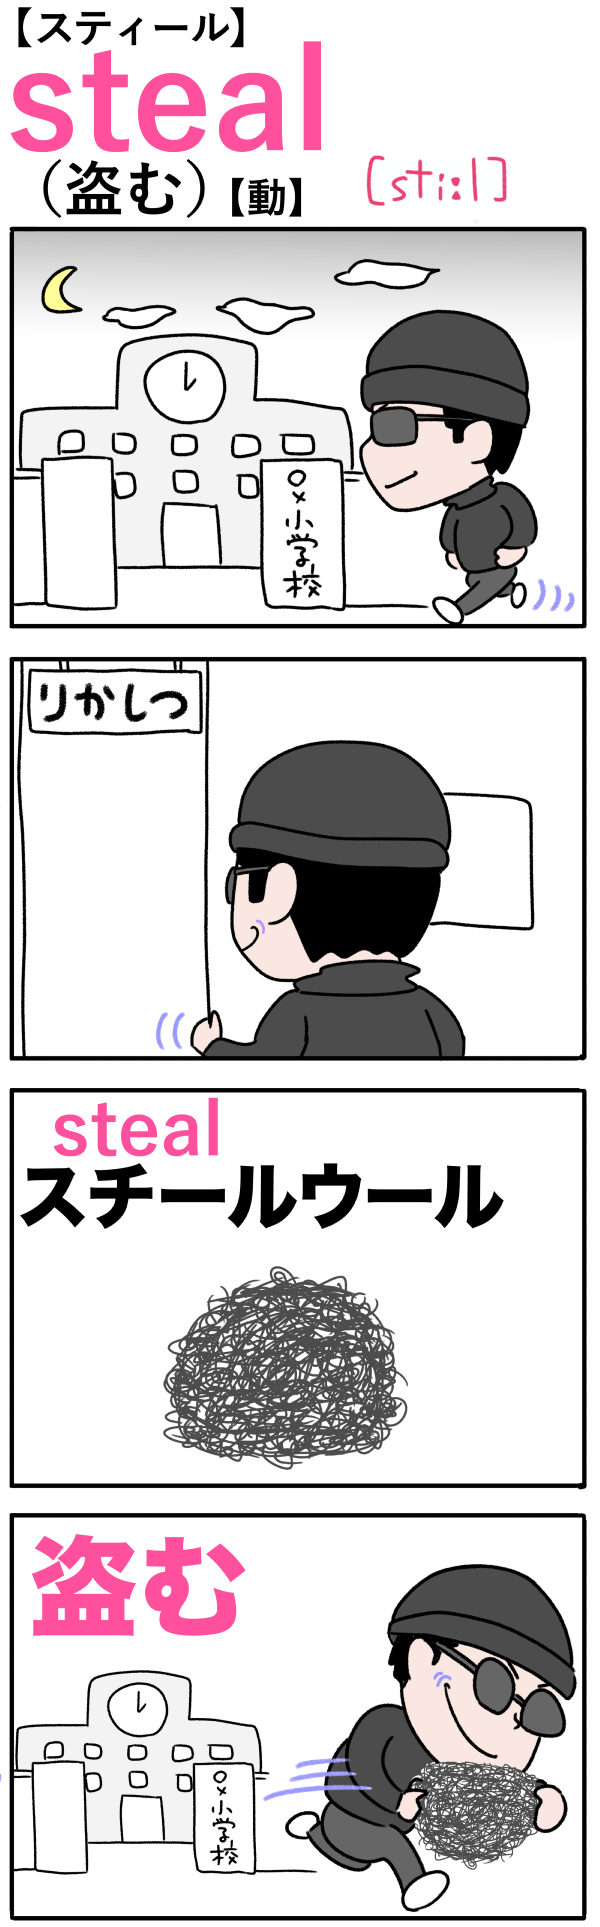 steal（盗む）の語呂合わせ英単語